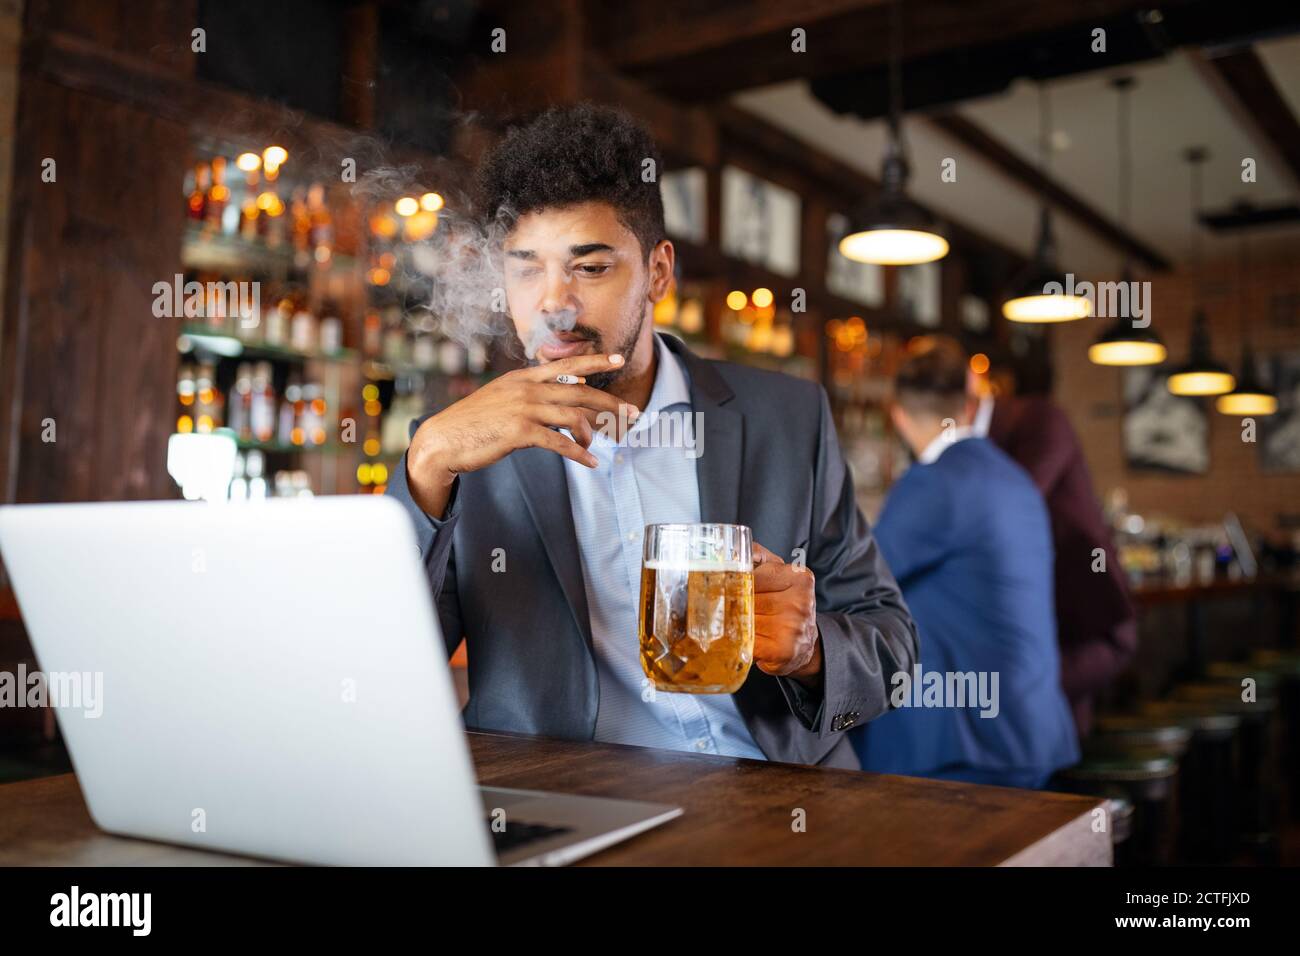 Man drinking beer and smoking cigarette while working on computer. Bad habit concept. Stock Photo